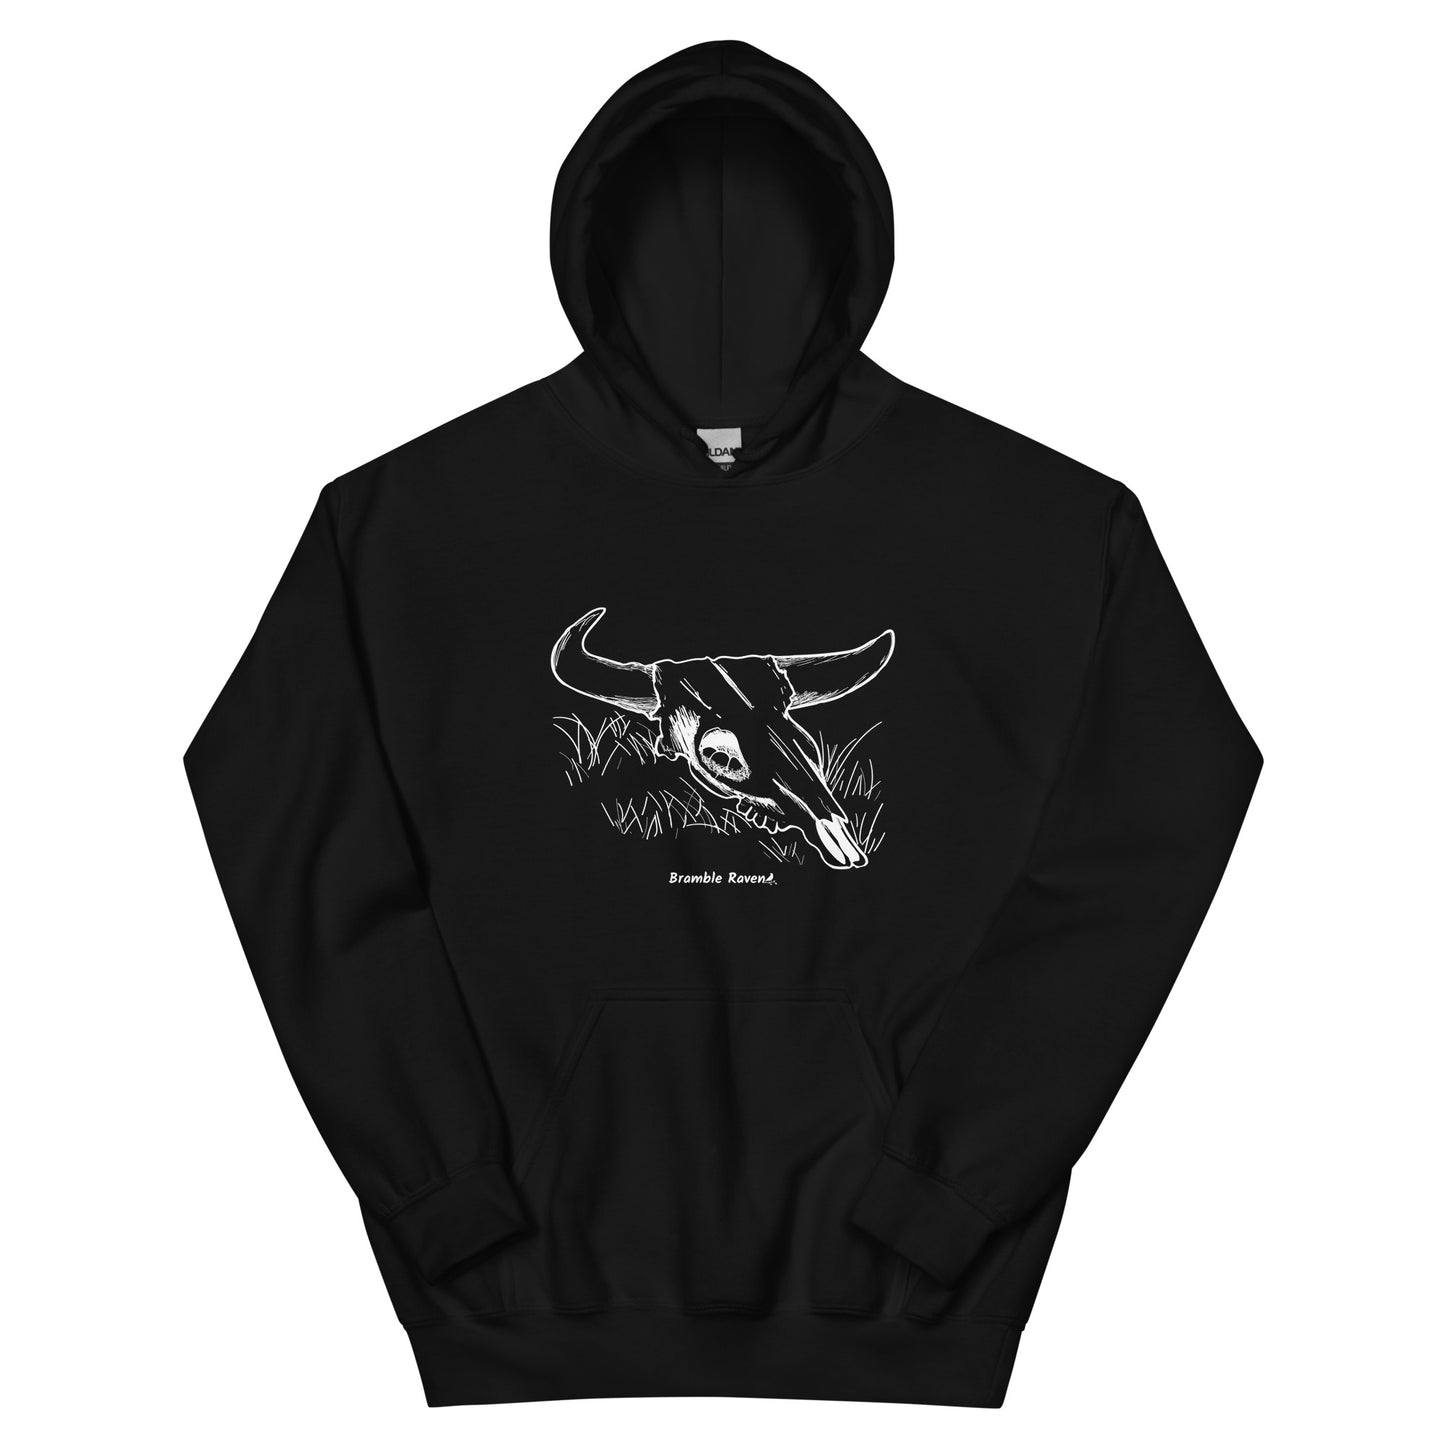 Black colored unisex hoodie. Front has image of a cow skull cradling a bird nest. Features double-lined hood and front pouch pocket.